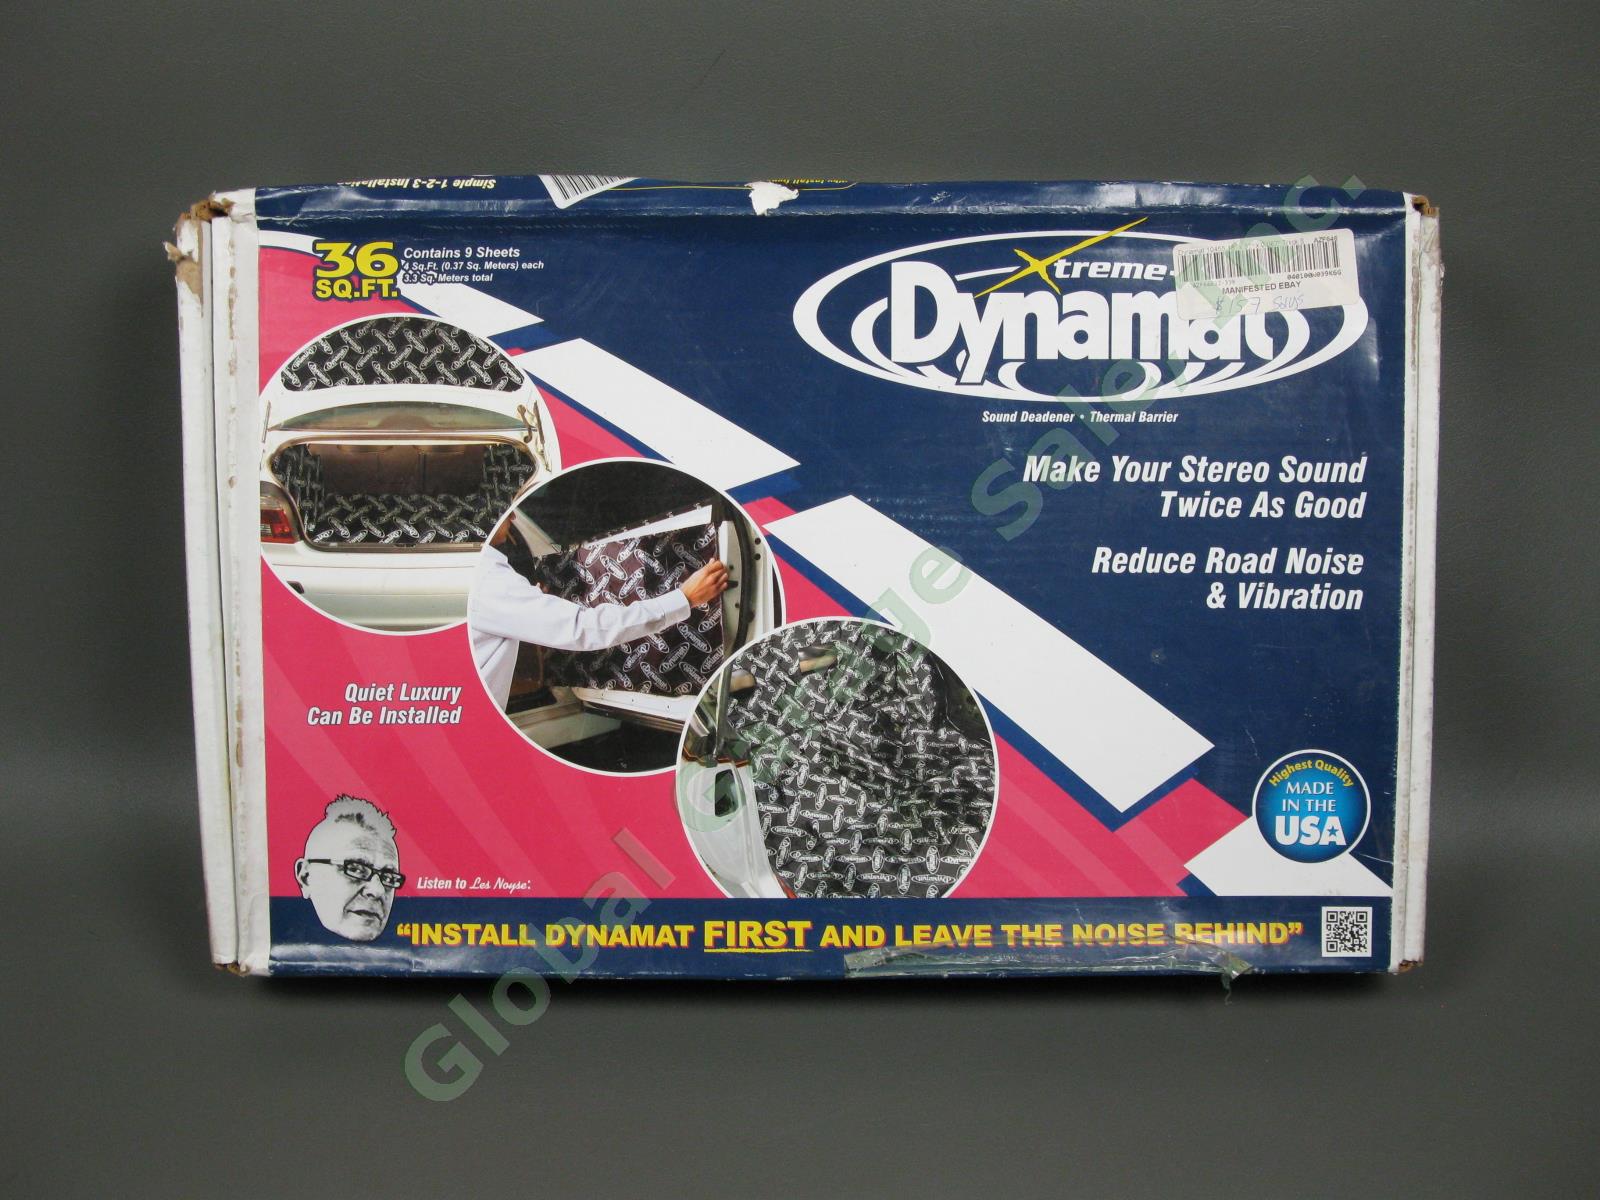 NEW Dynamat Xtreme 10455 Sound Deadener 18"x32" Self-Adhesive Thermal Barrier NR